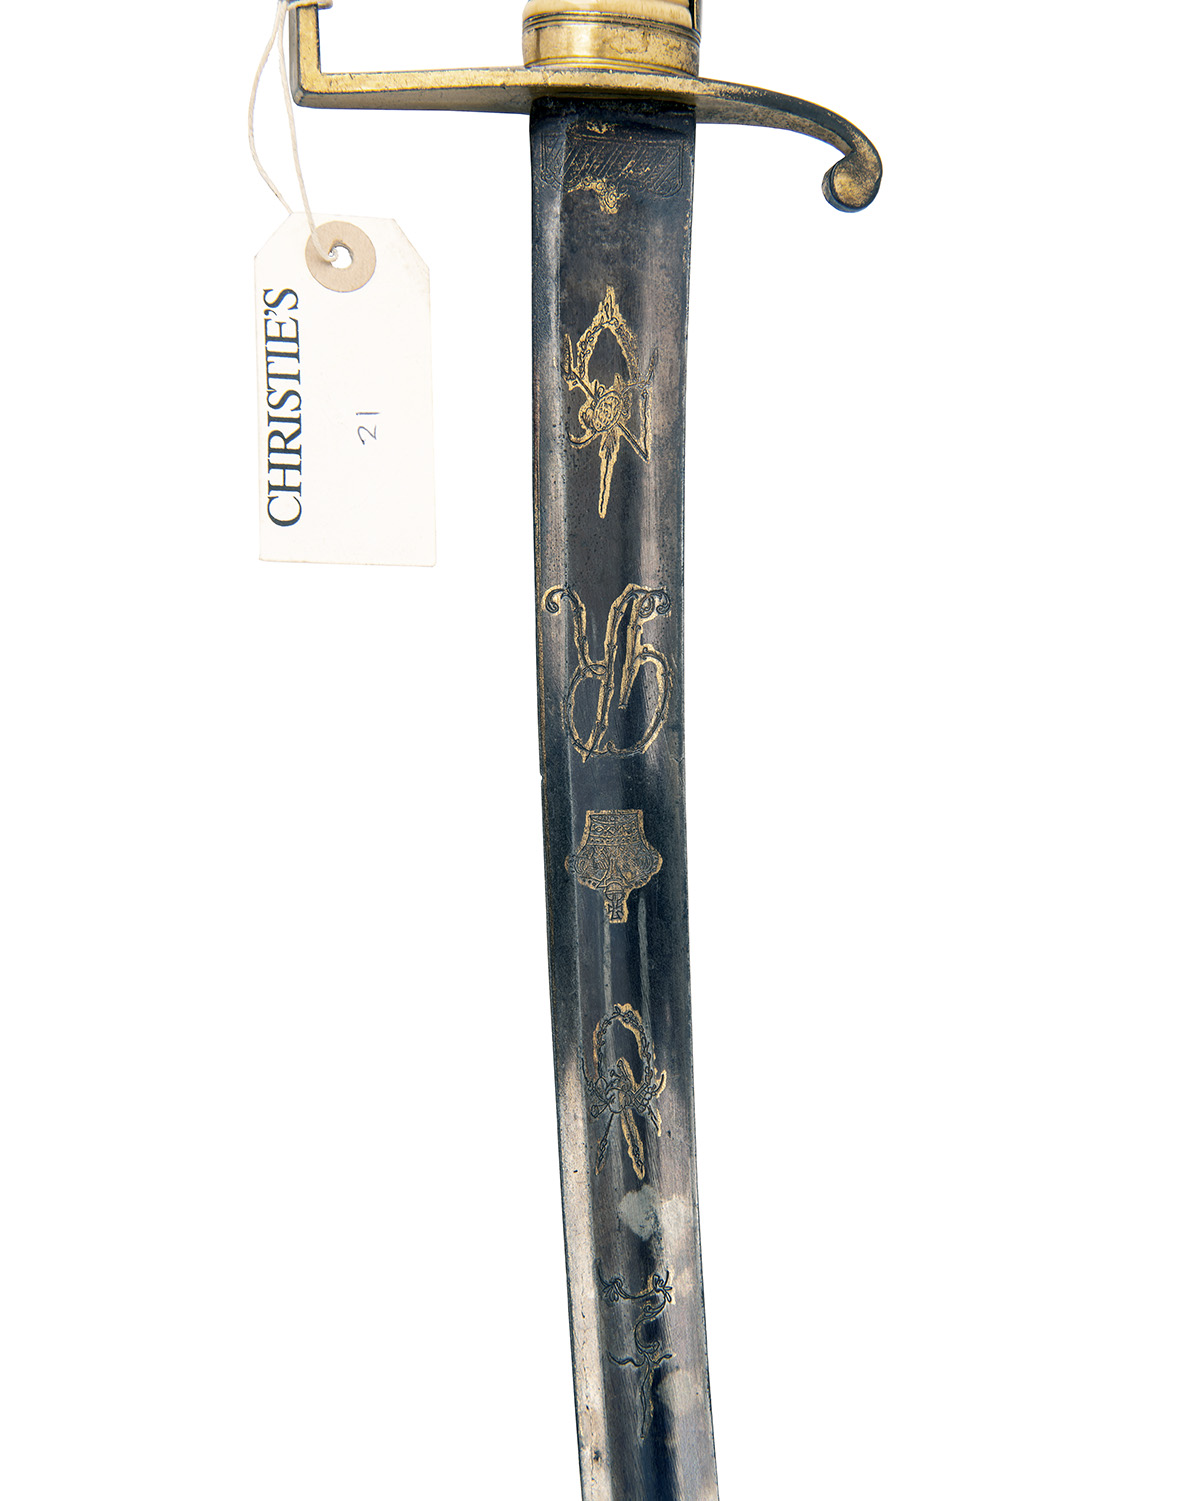 J.J. RUNKEL, SOLINGEN A 1796 PATTERN BRITISH OFFICER'S LIGHT CAVALRY SABRE WITH BLUE AND GILT - Image 3 of 5